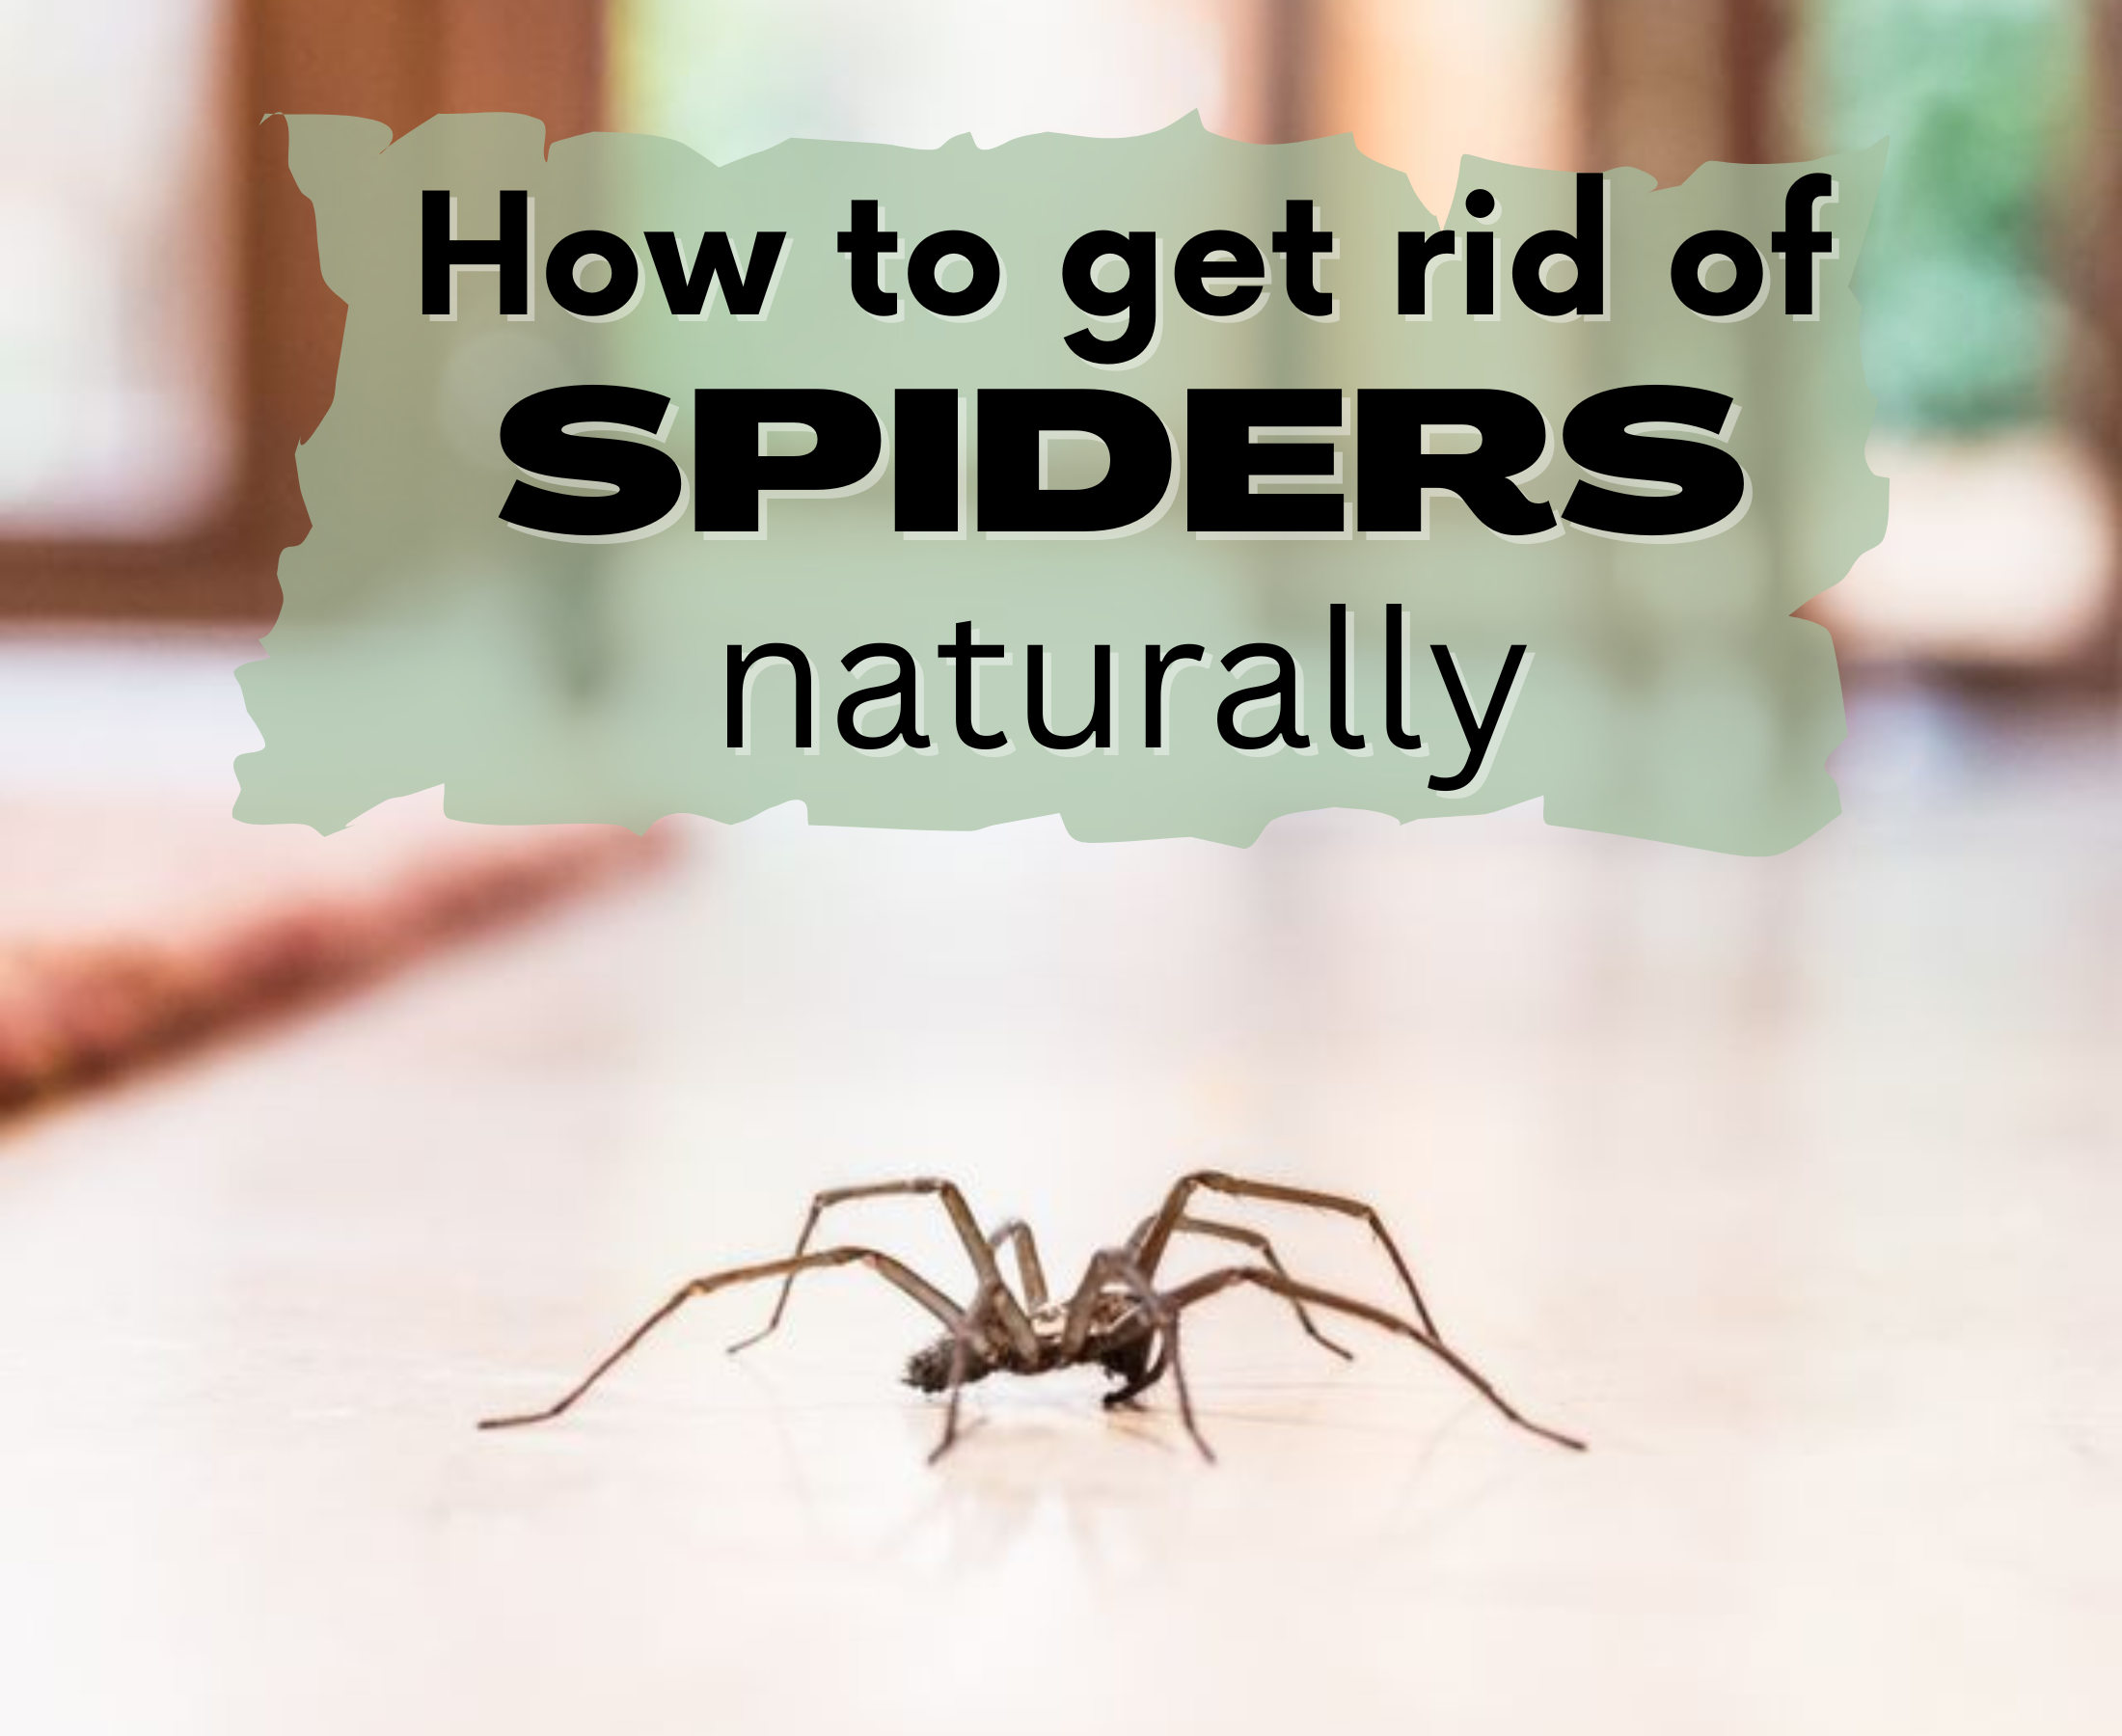 How to Get Rid of Spiders in the House